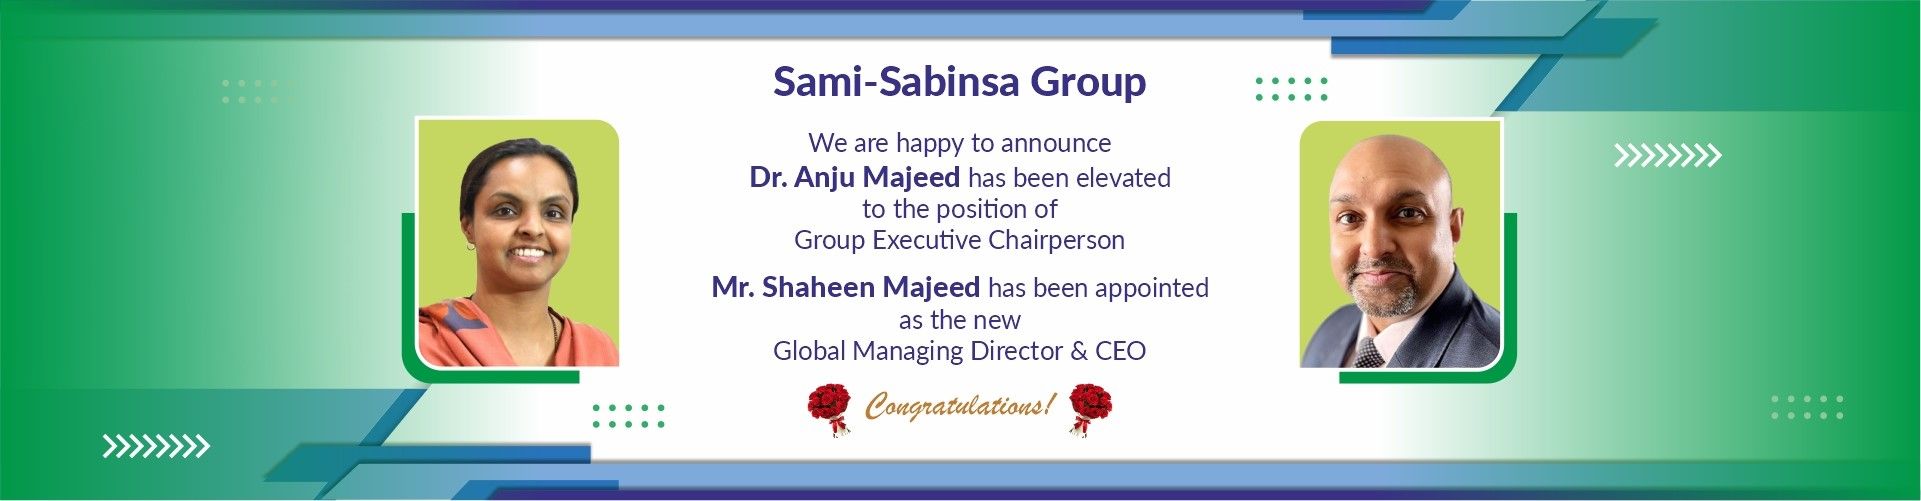 Appointment to Sami-Sabinsa Group